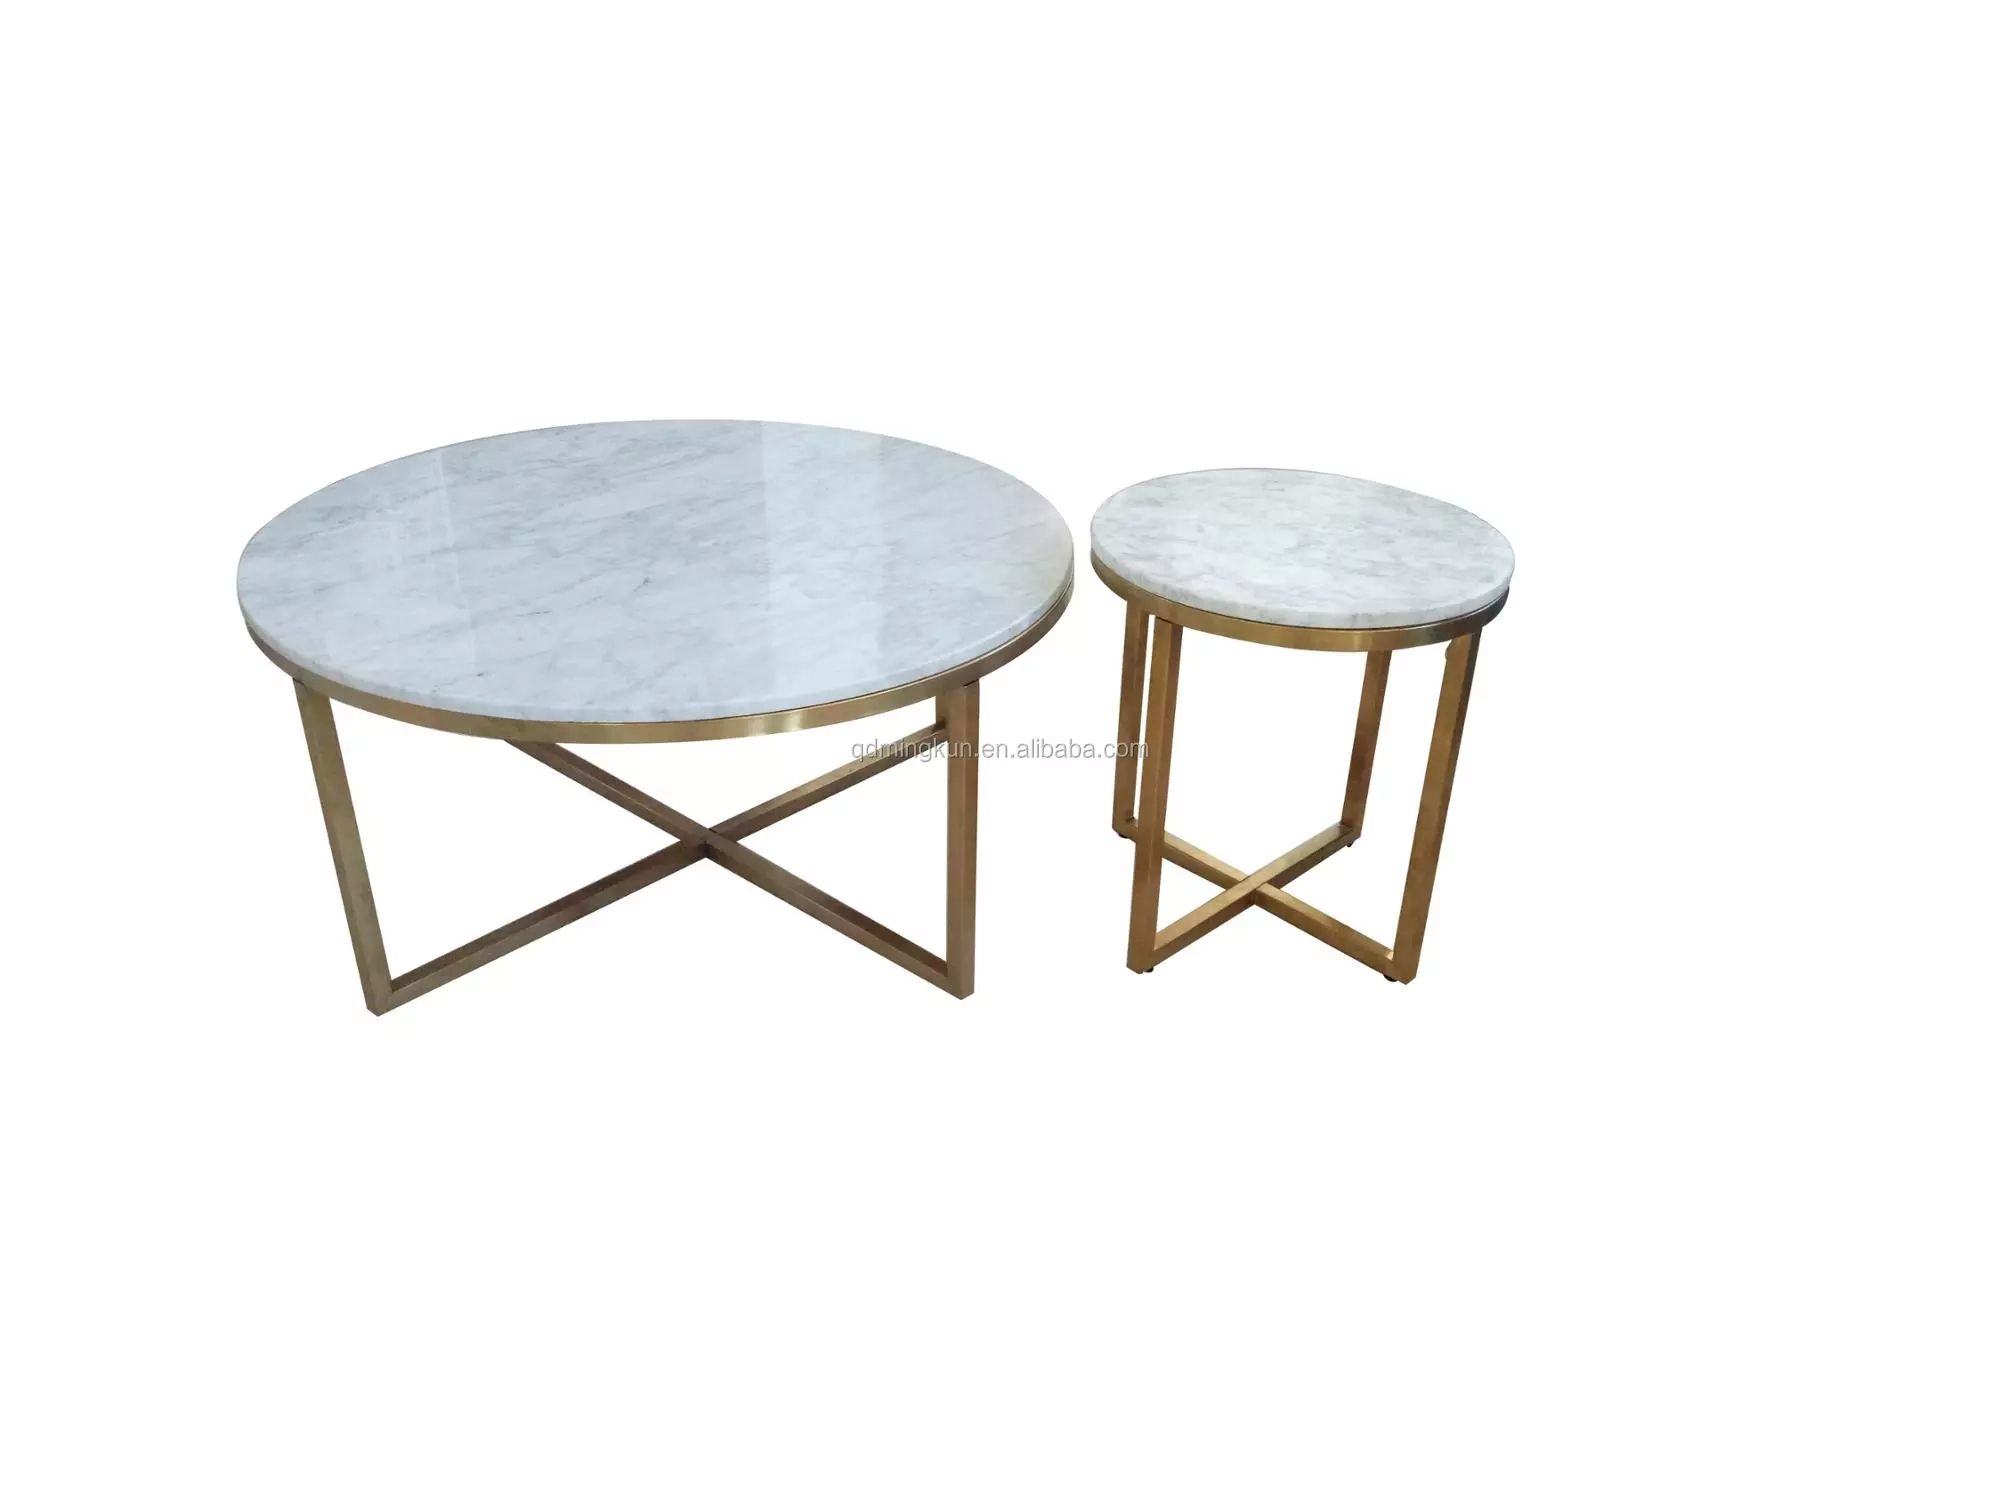 Modern Round Nesting Marble Metal Legs For Coffee Tables – Buy Modern Round  Nesting Coffee Tables,metal Legs For Coffee Table,marble Coffee Tables  Product On Alibaba With Regard To Splayed Metal Legs Coffee Tables (View 15 of 15)